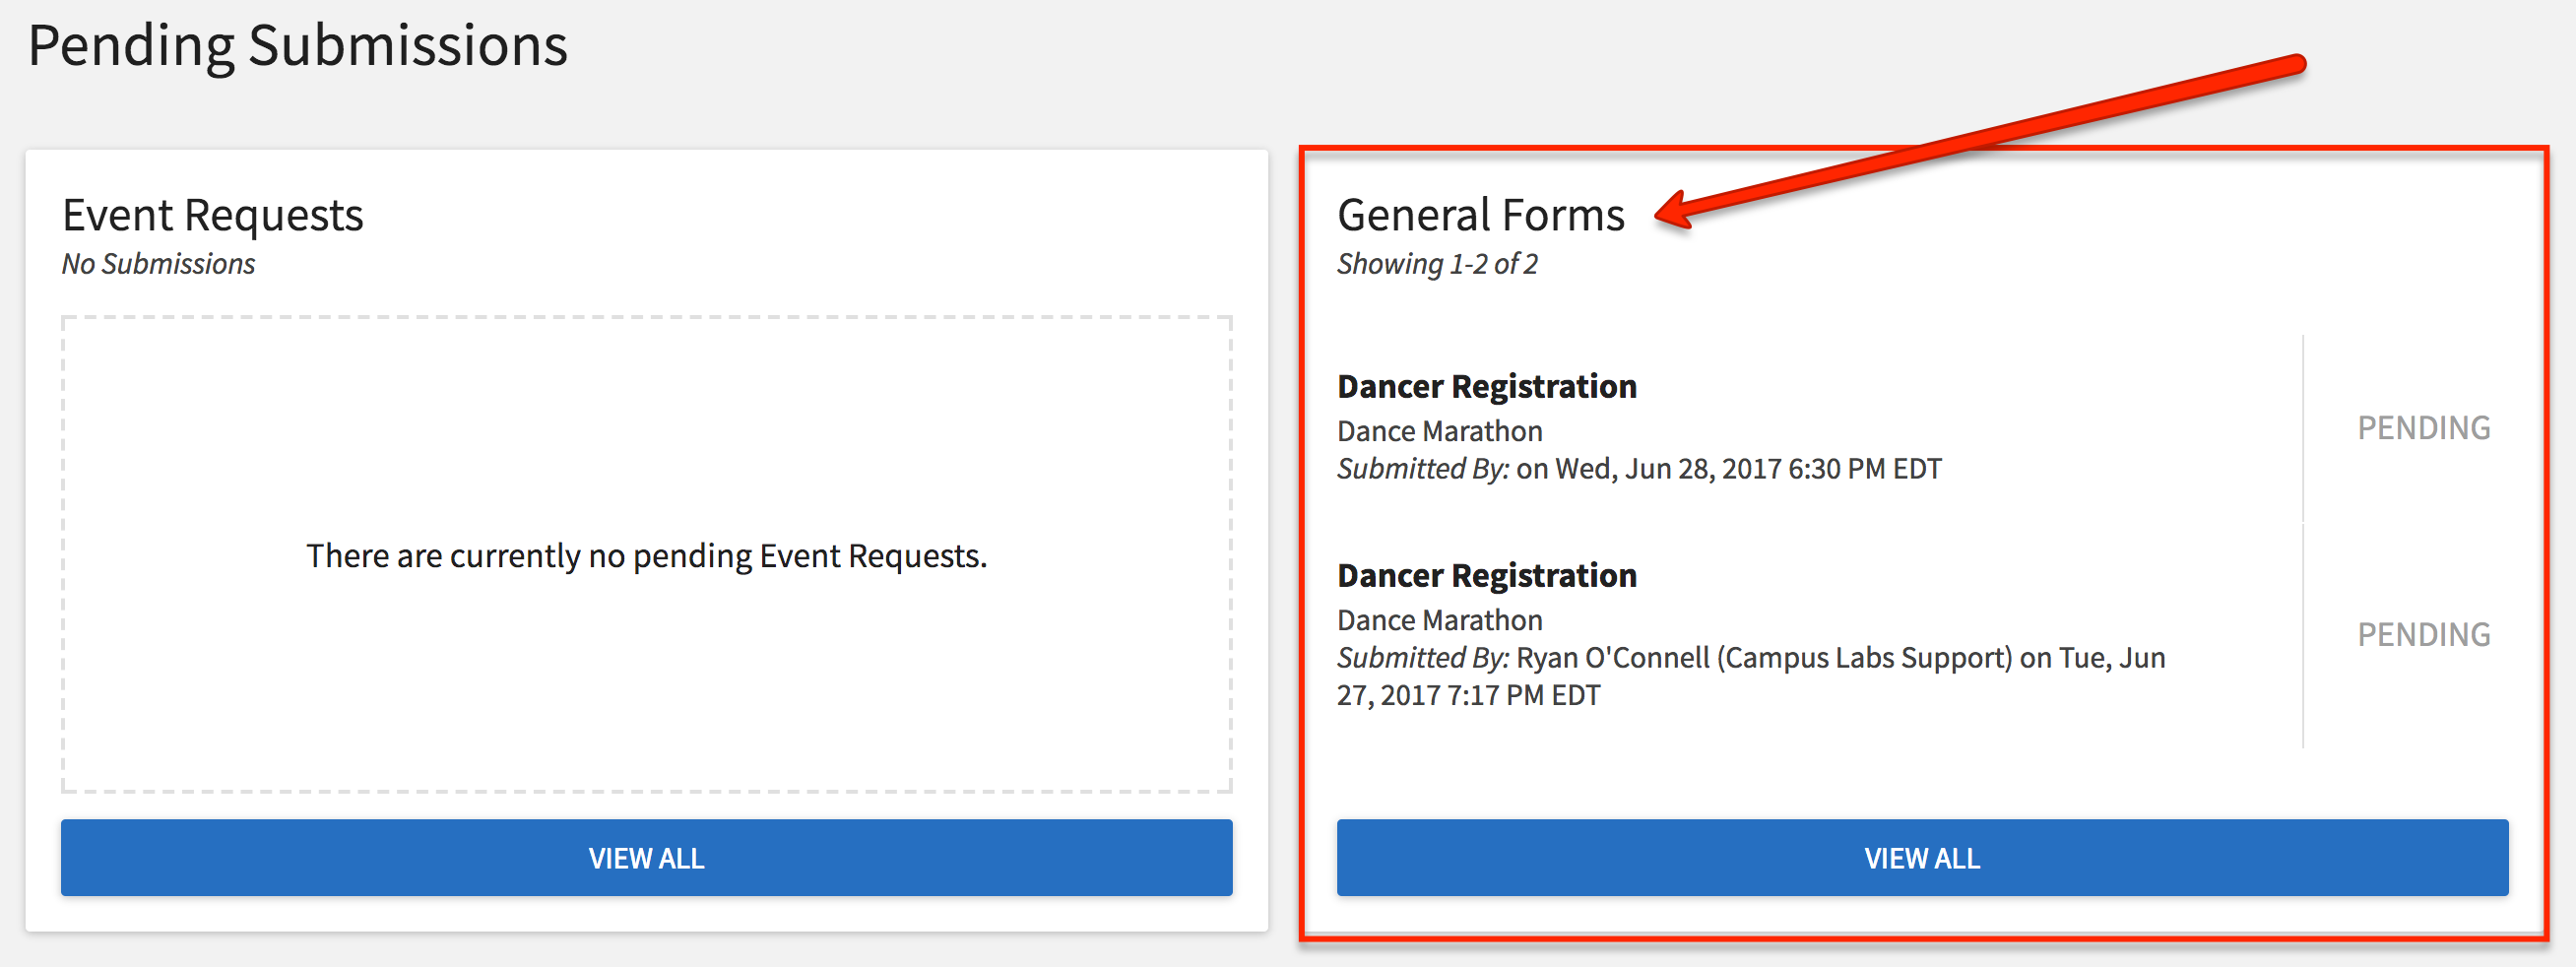 Screenshot of navigating to general forms under the manage view